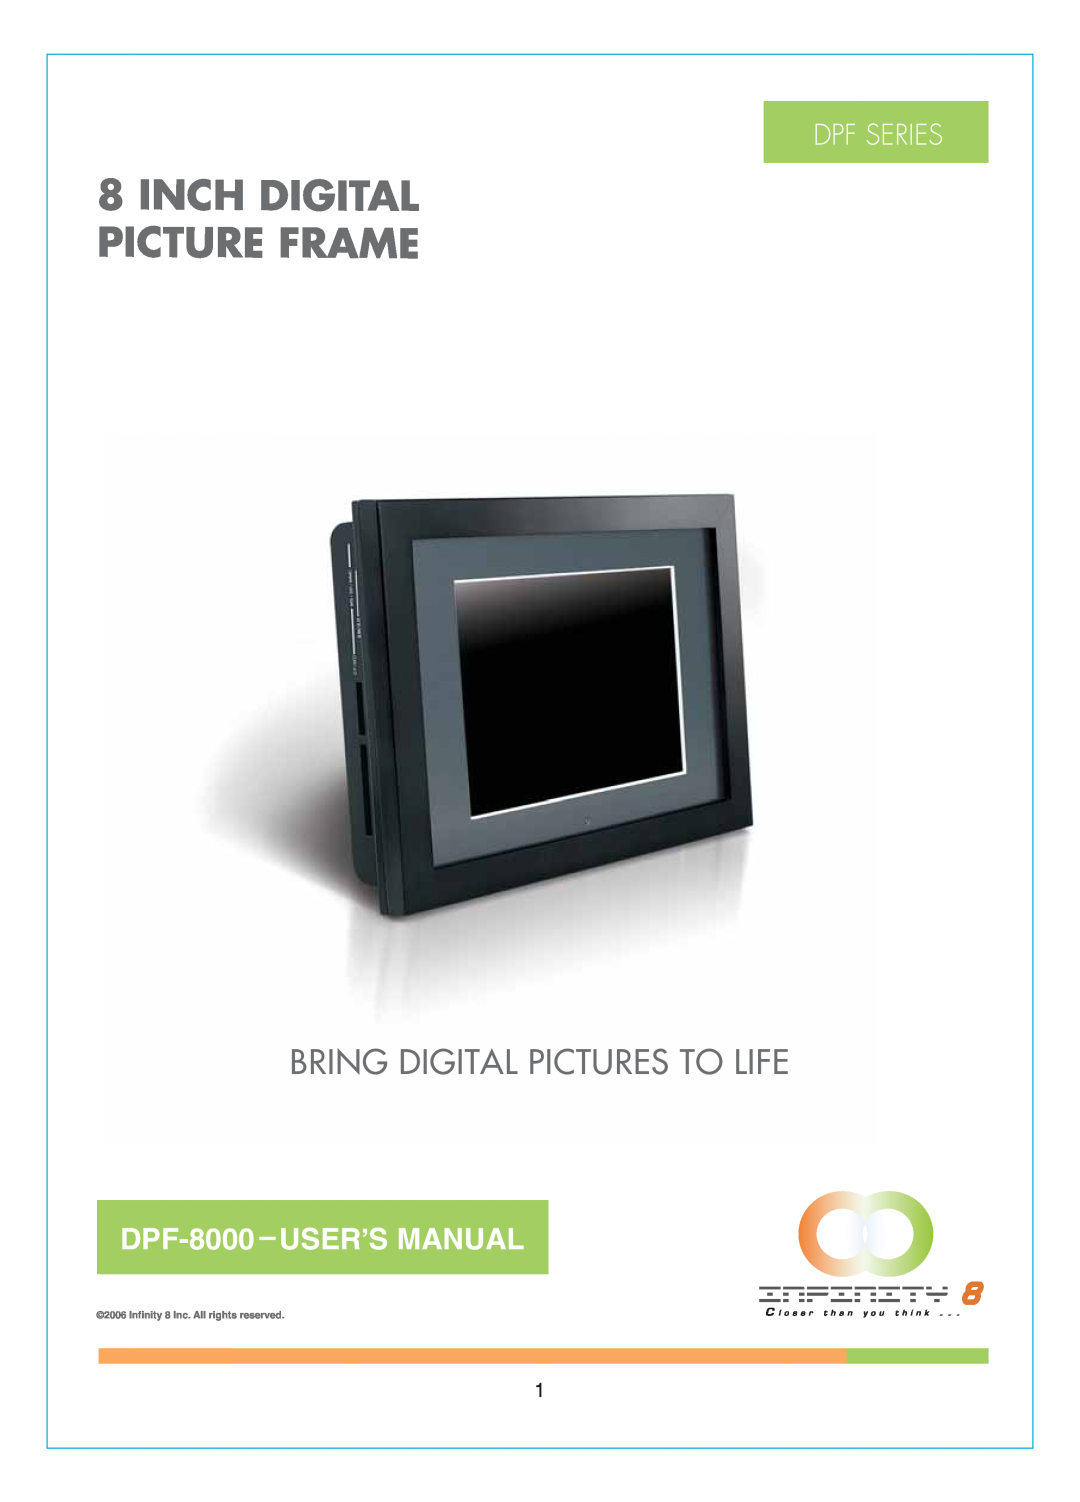 Infinity user manual Inch Digital Picture Frame, Bring Digital Pictures To Life, DPF-8000USER,S MANUAL, Dpf Series 